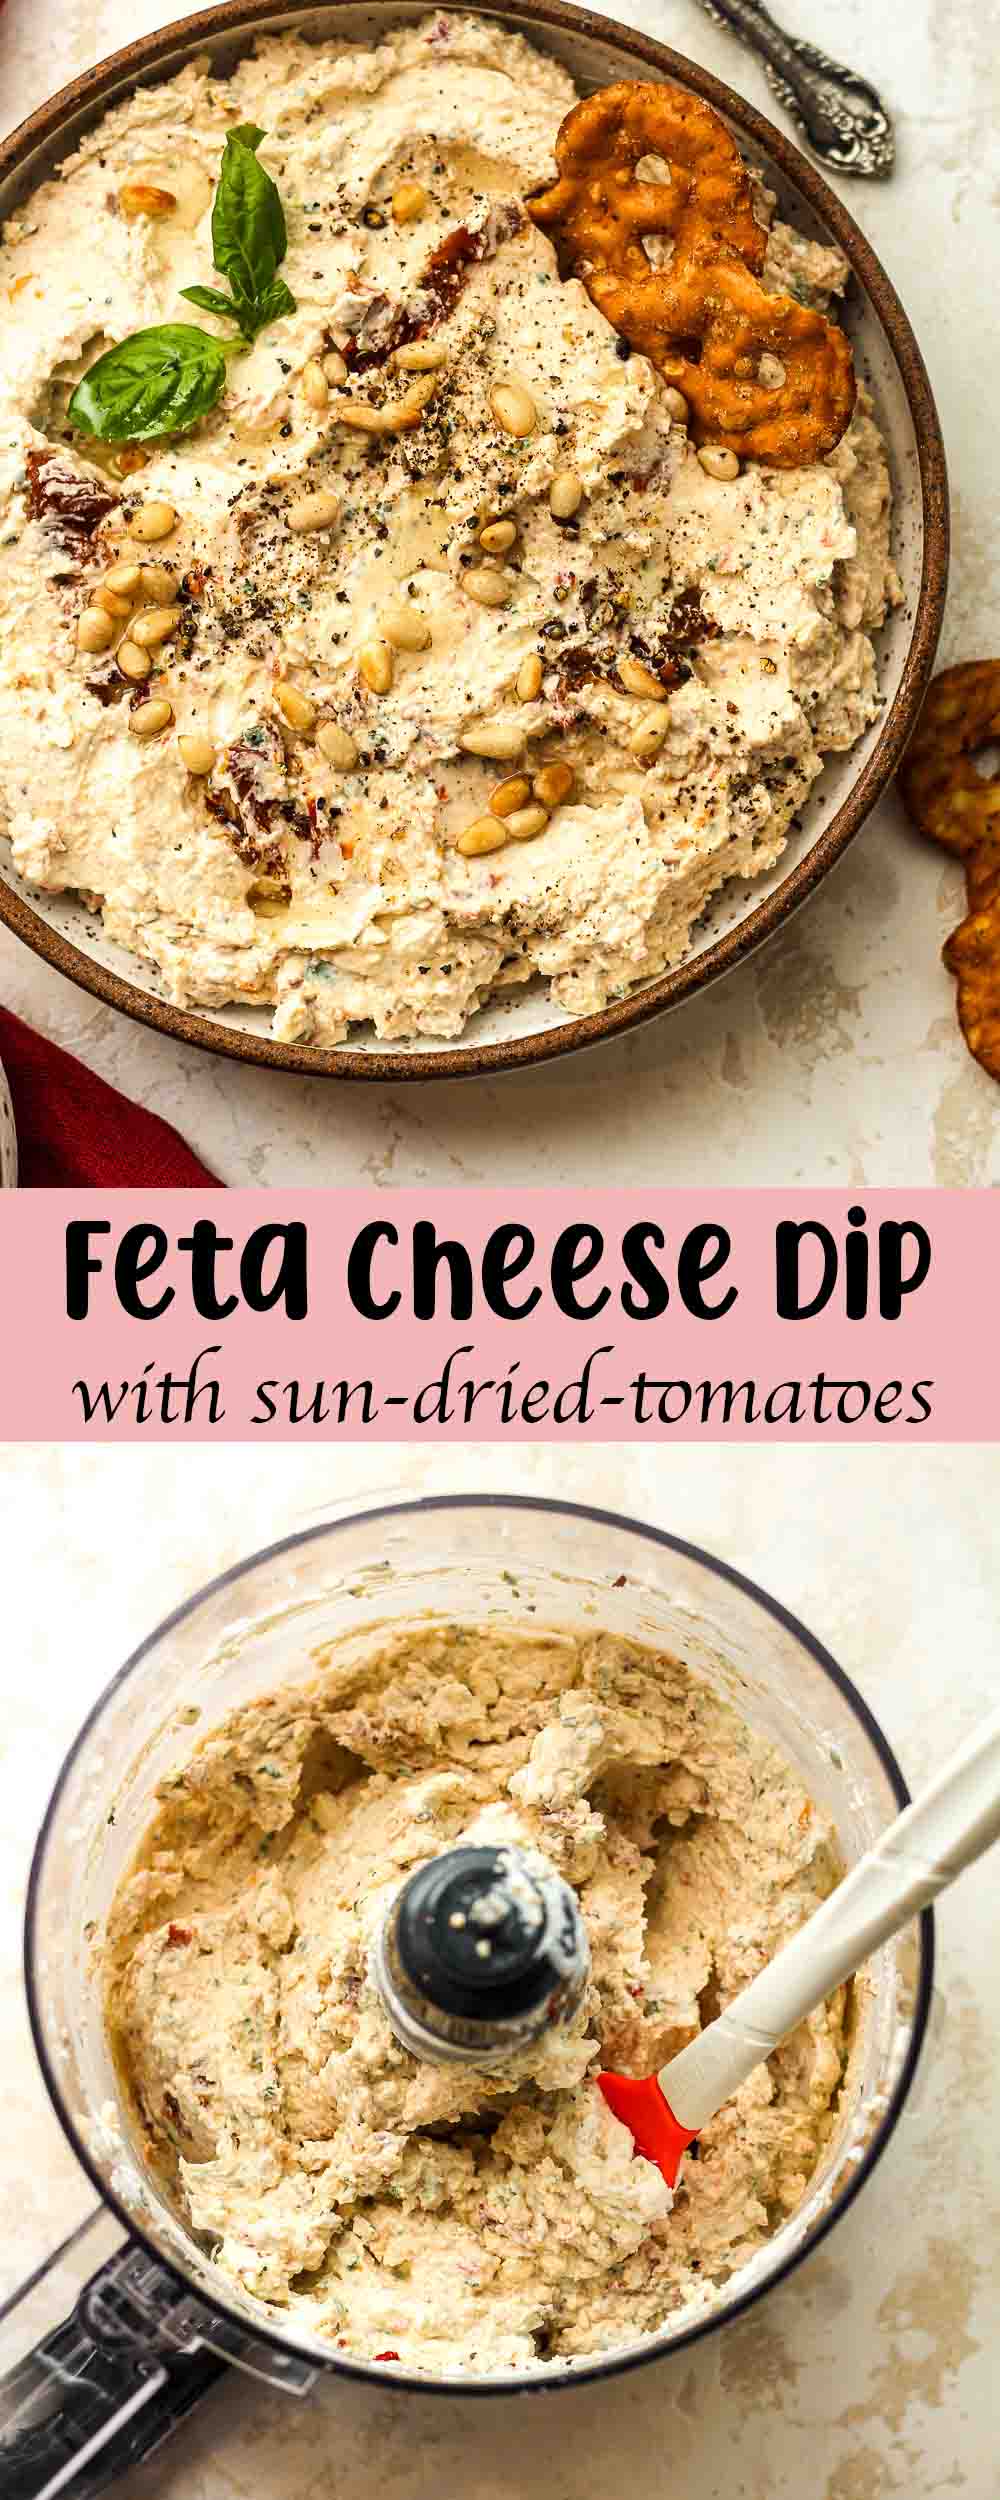 A collage of photos - a food processor of the dip and a bowl of feta cheese dip with sun-dried tomatoes.